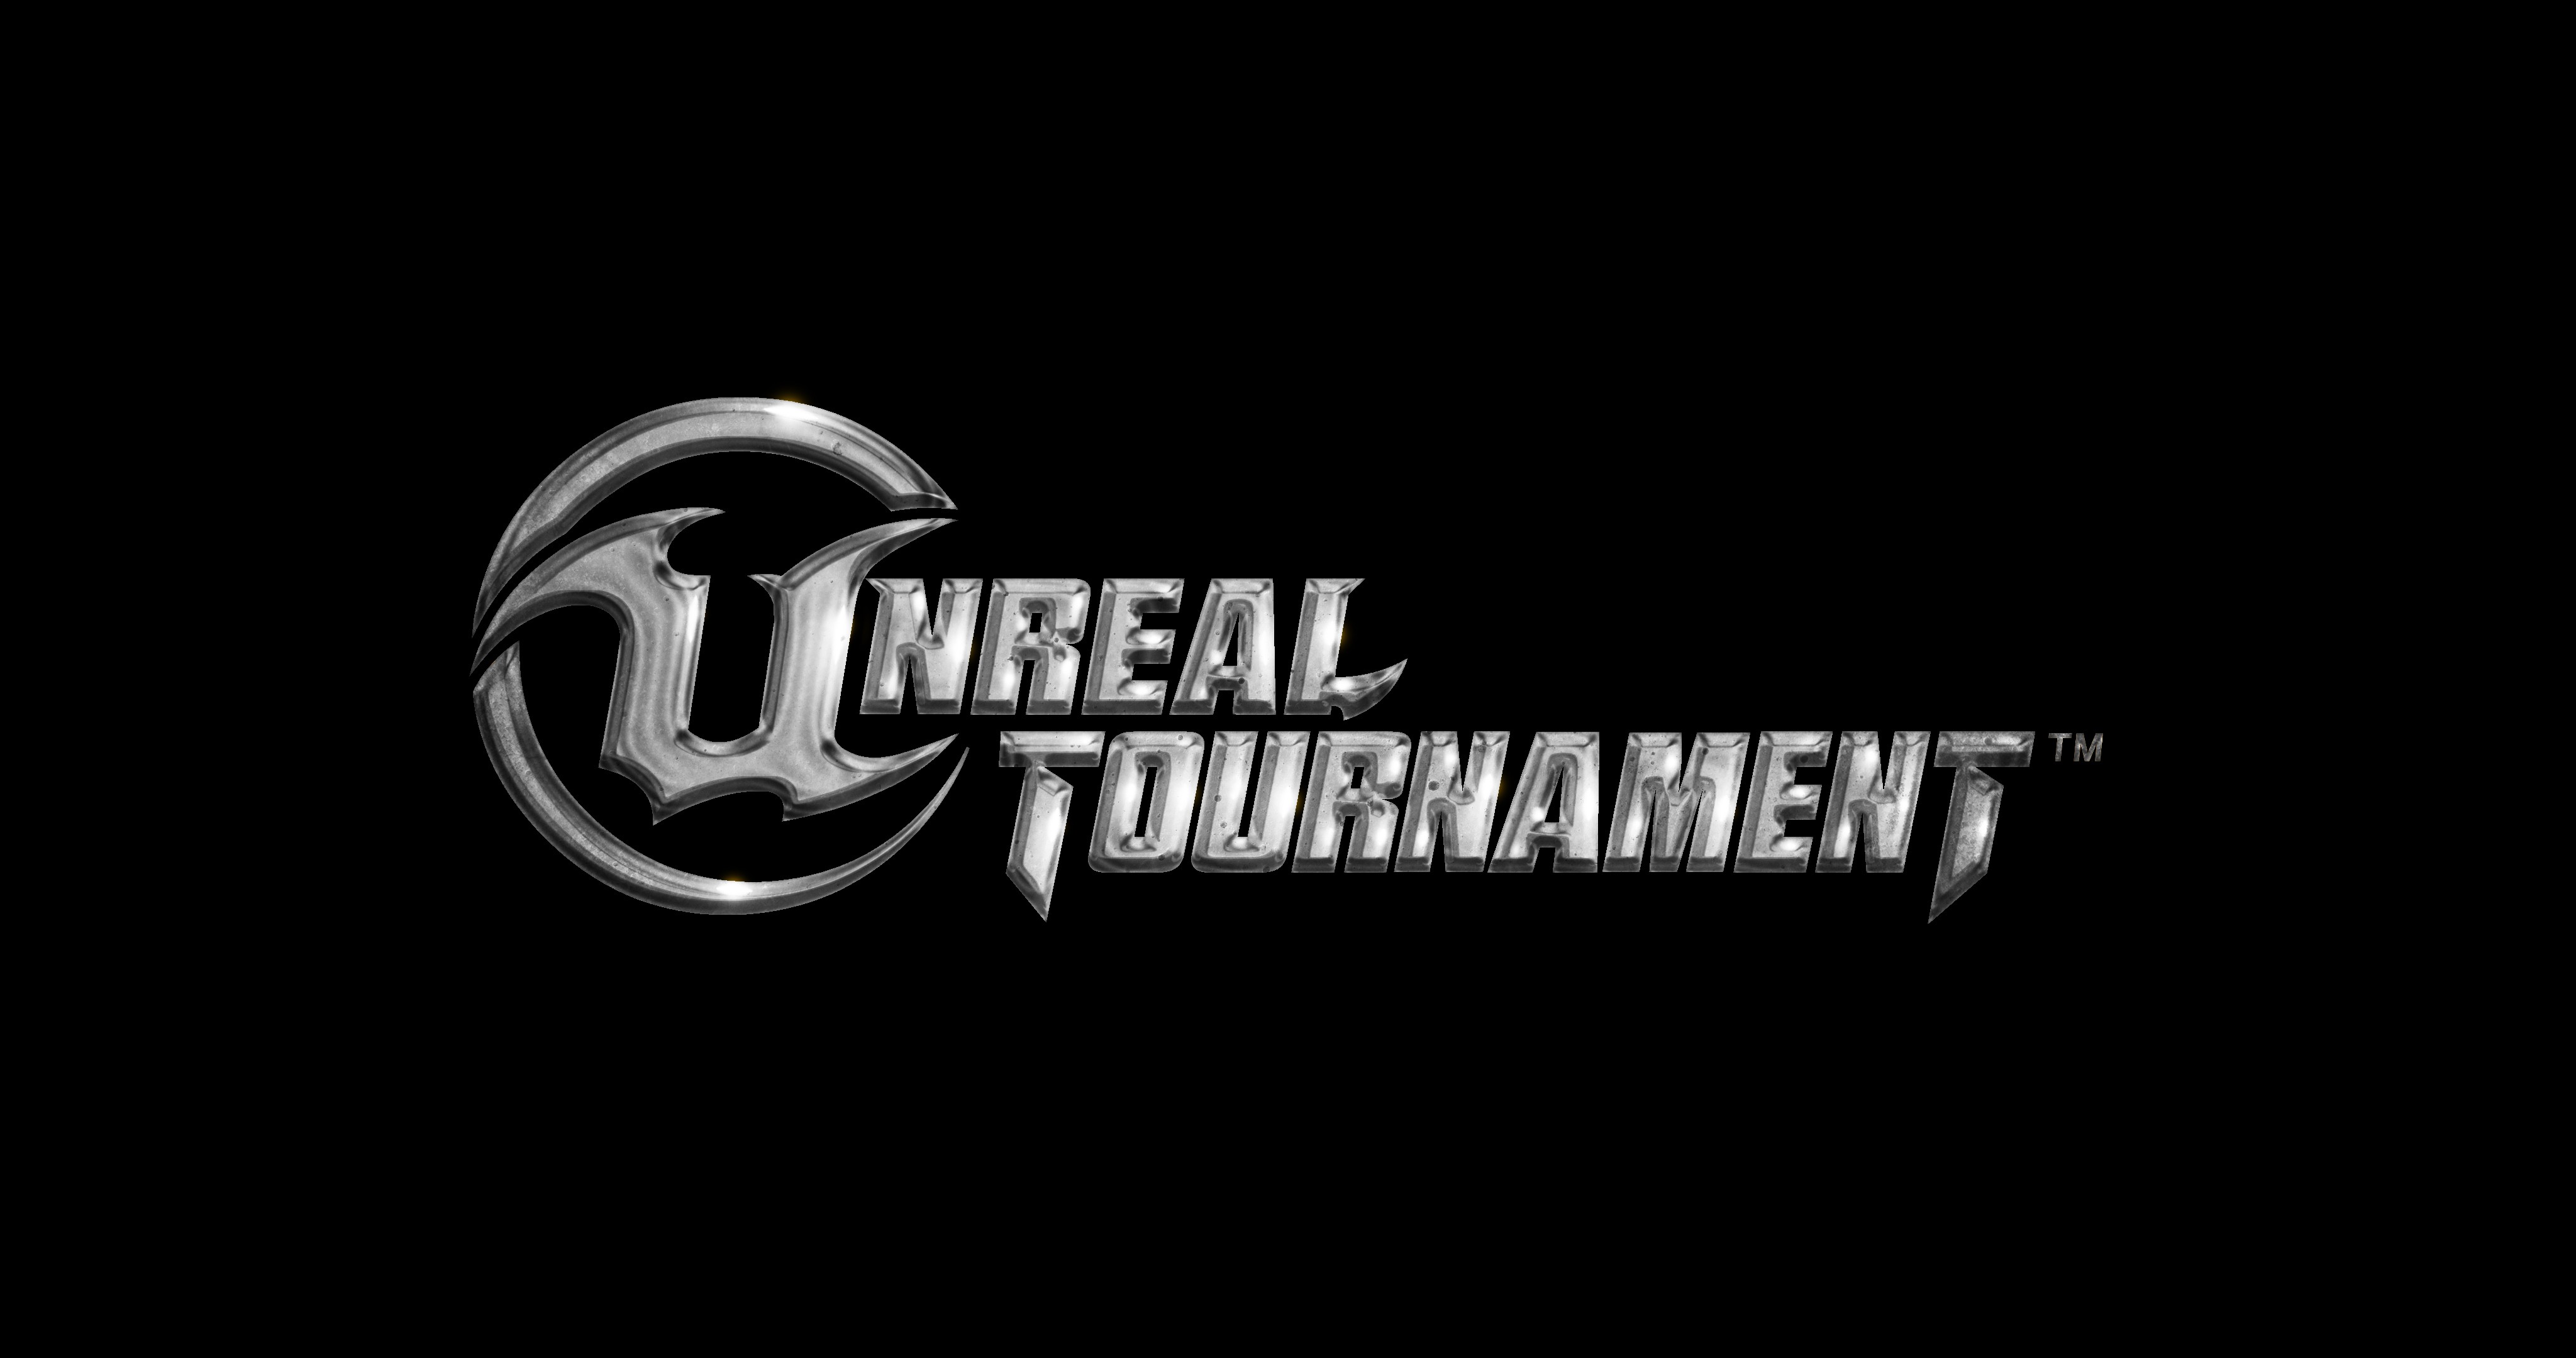 General 4096x2160 Unreal Tournament simple background PC gaming logo